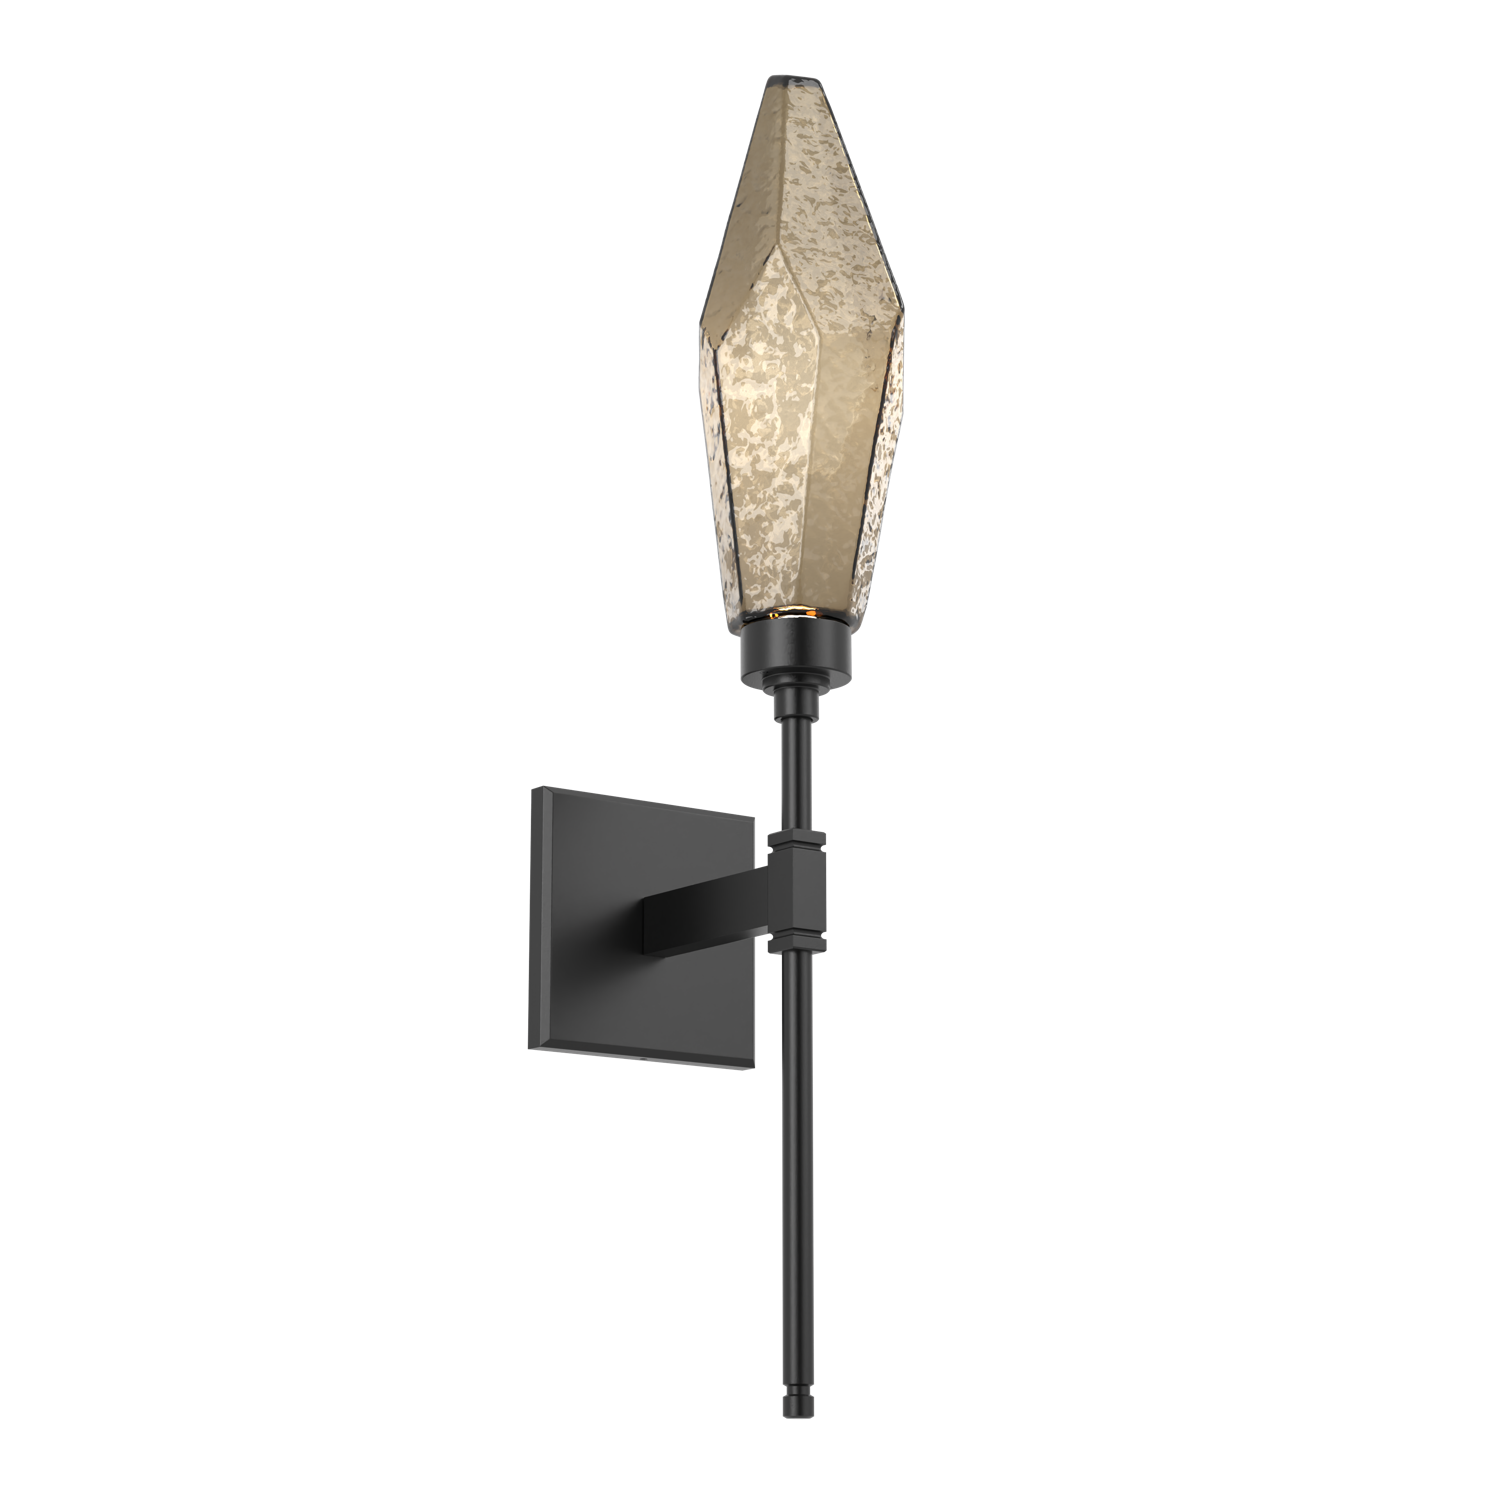 IDB0050-07-MB-CB-Hammerton-Studio-Rock-Crystal-belvedere-wall-sconce-with-matte-black-finish-and-chilled-bronze-blown-glass-shades-and-LED-lamping